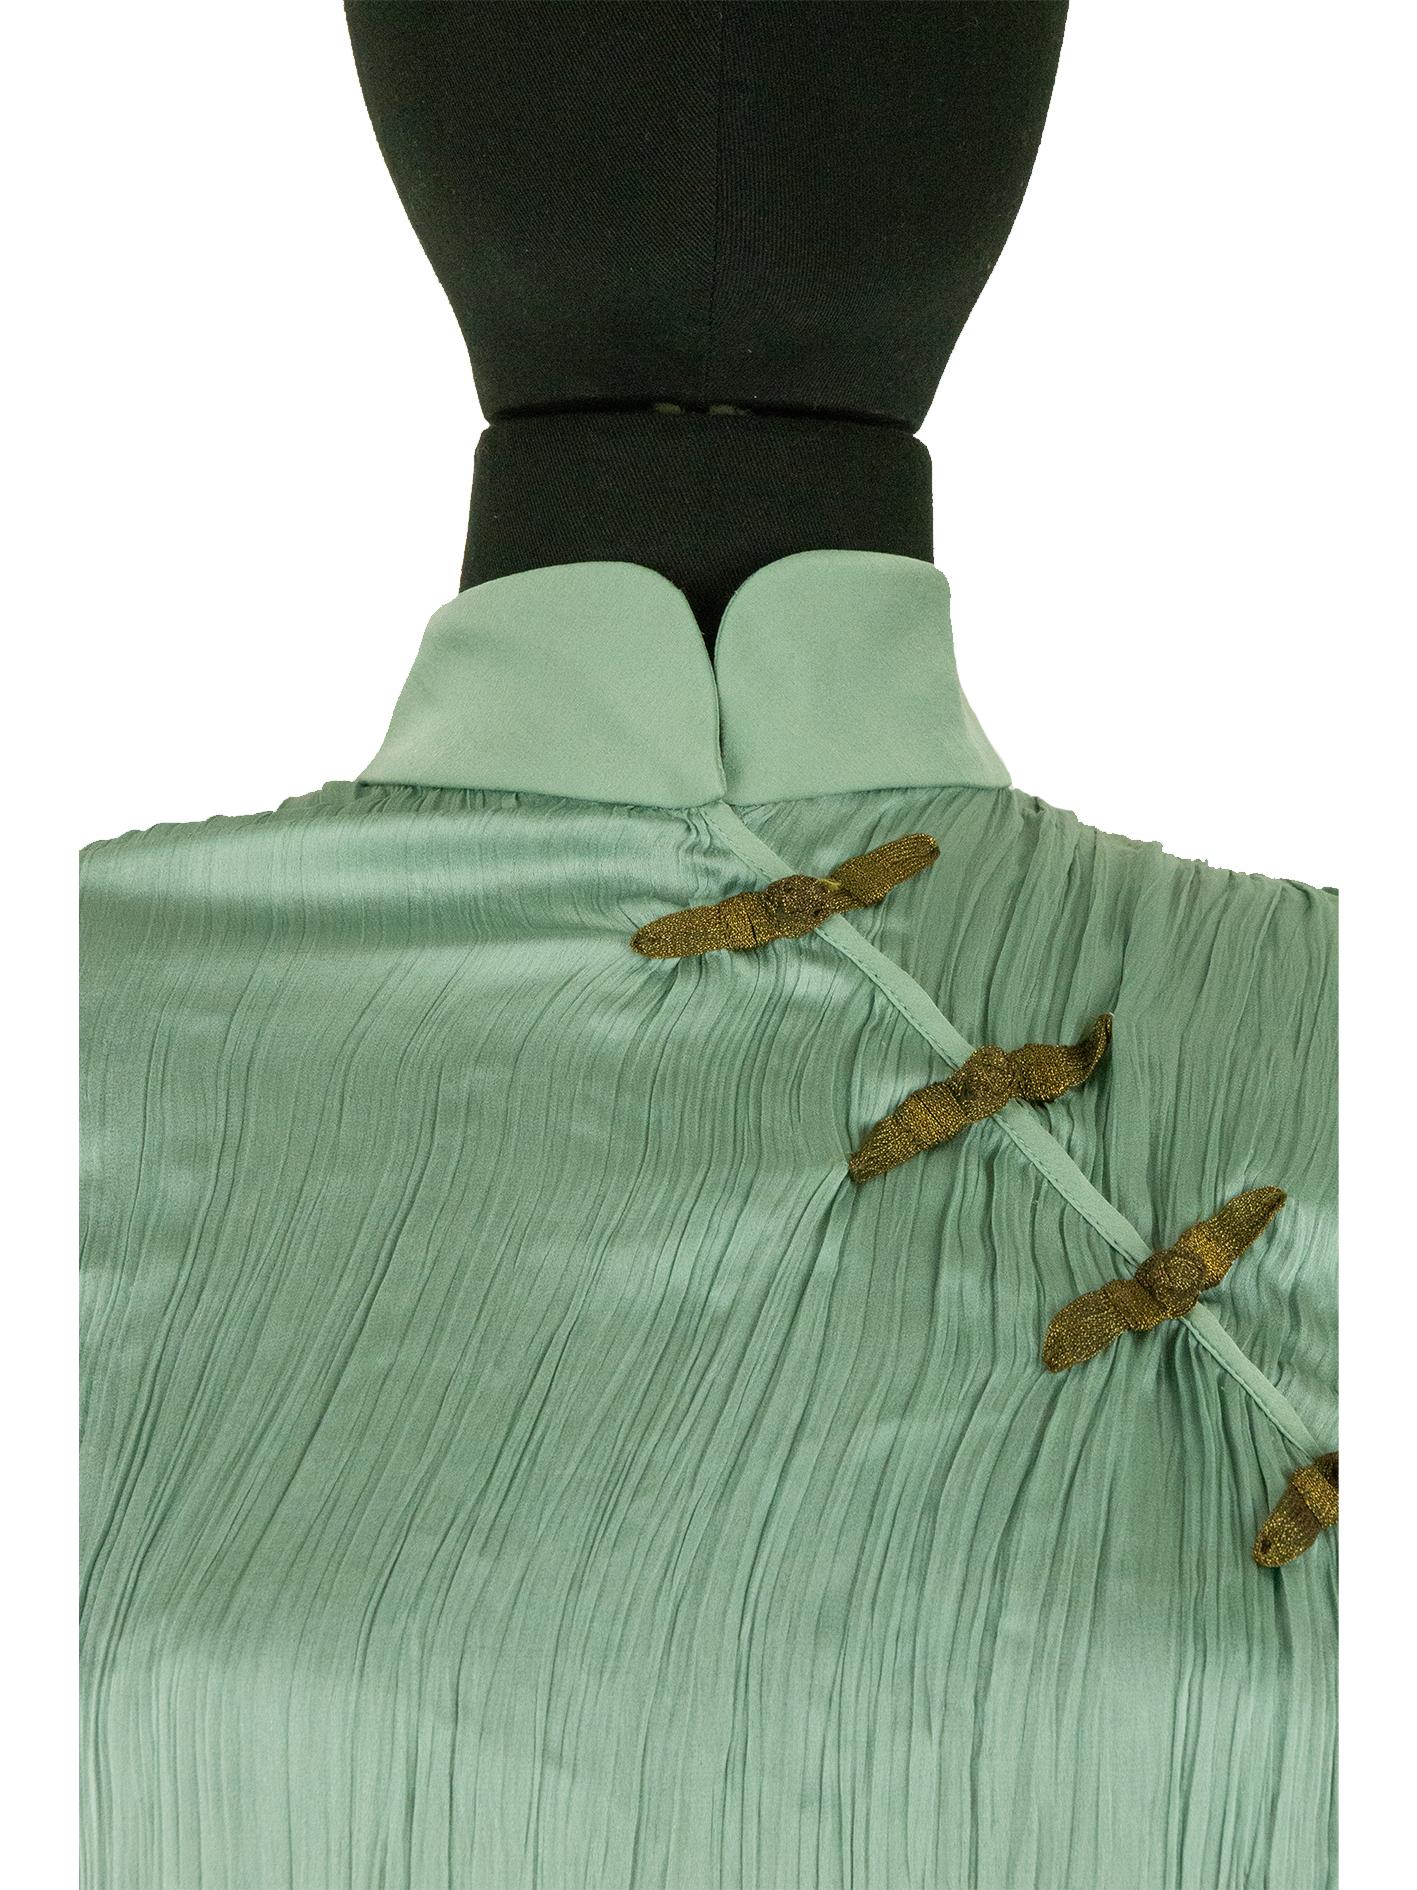 A 1999 Dior by Galliano green silk plissé cheongsam blouse. This traditional chinese cheongsam inspired blouse. In an interview with Vogue, Galliano explains that he was fascinated with Chinese culture; he gained this fascination through the help of